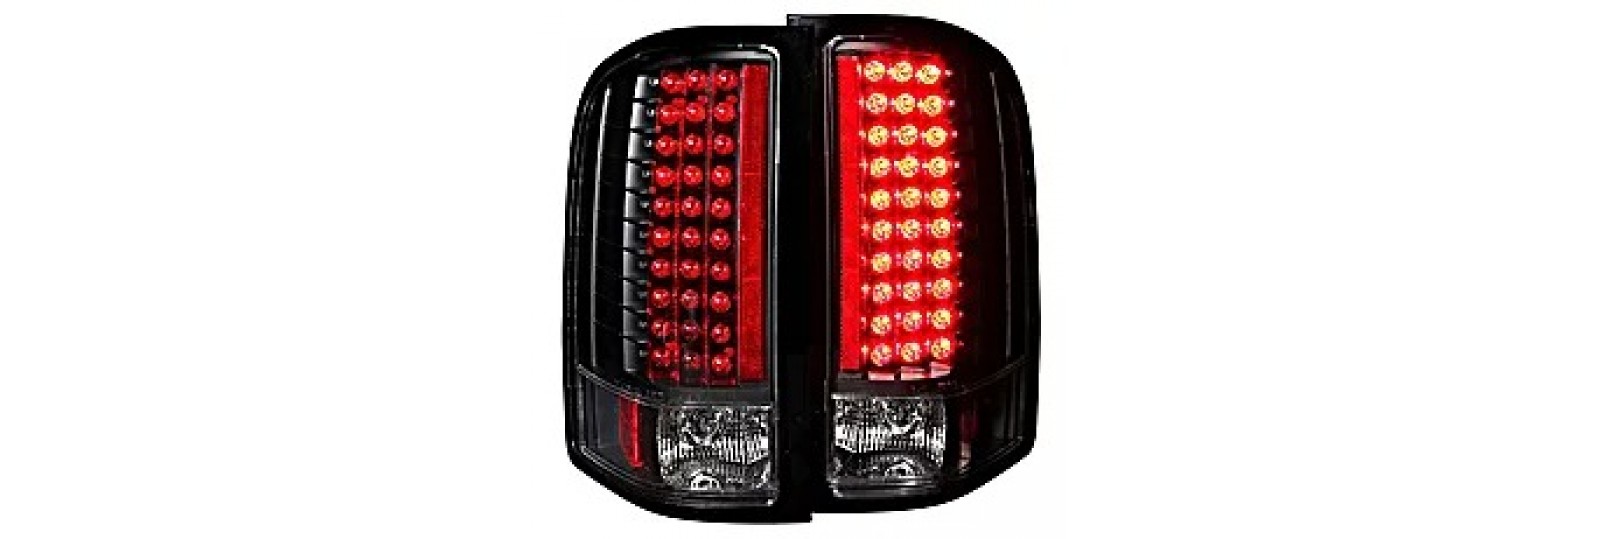 LED Taillights